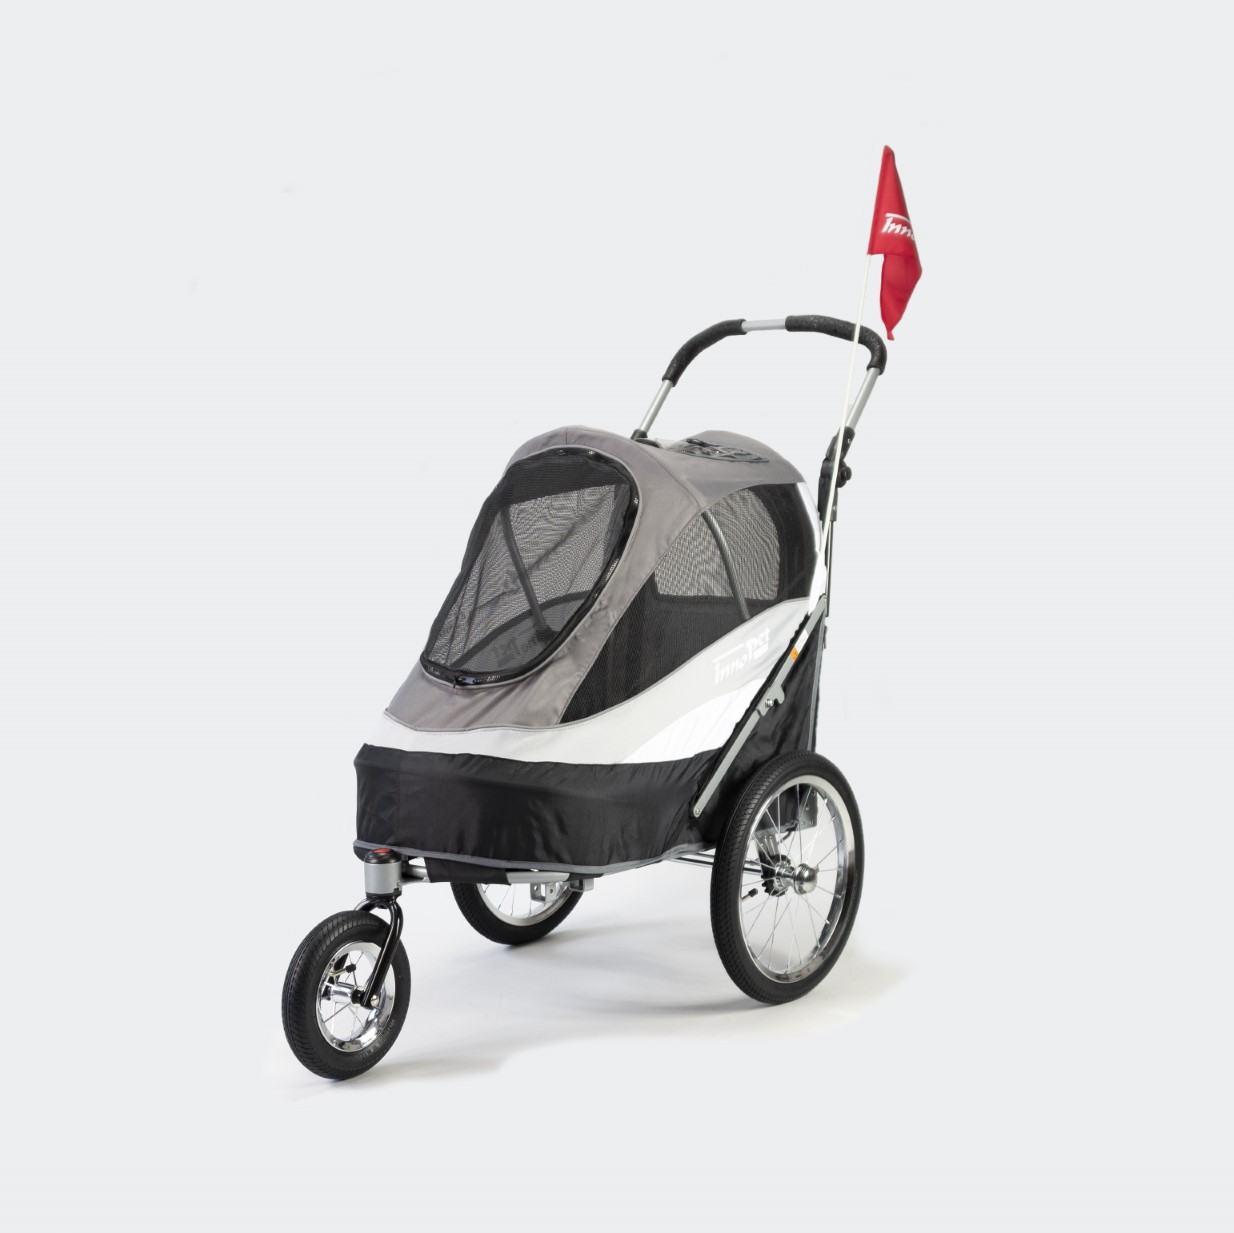 Pet stroller <b>Sporty Trailer</b> for bicycle, air wheels